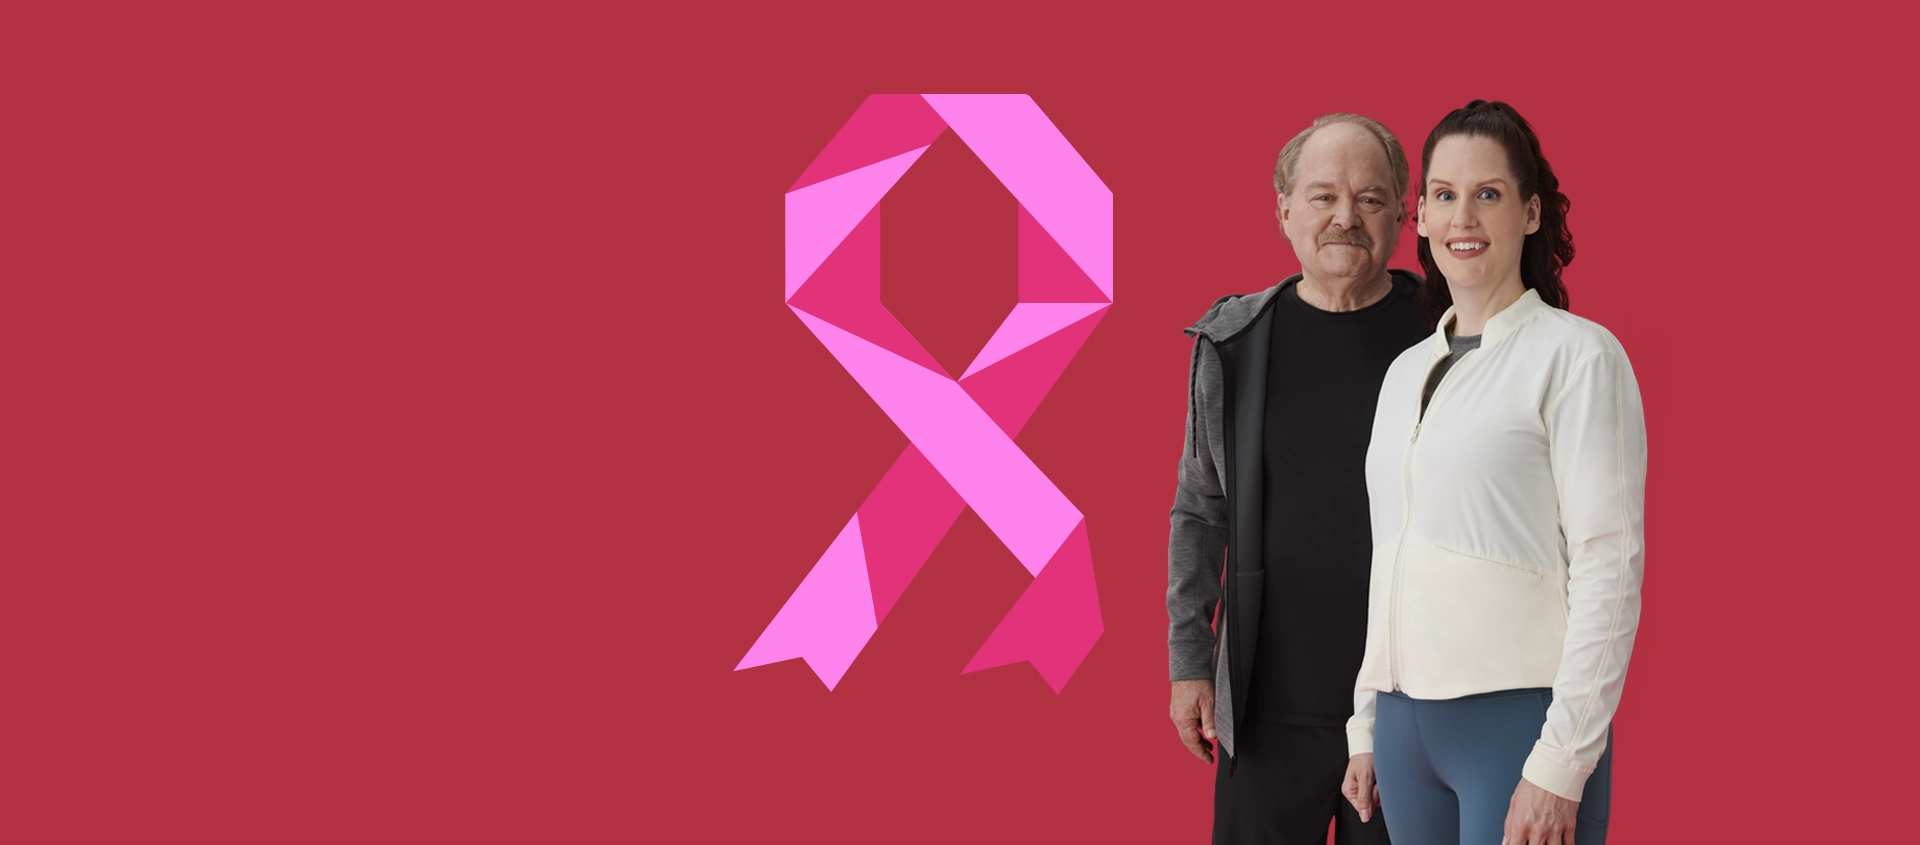 Morgan, a breast cancer survivor, is standing next to her father Len.  Next to them are the Canadian Cancer Society, CIBC and CIBC Run for the Cure logos.